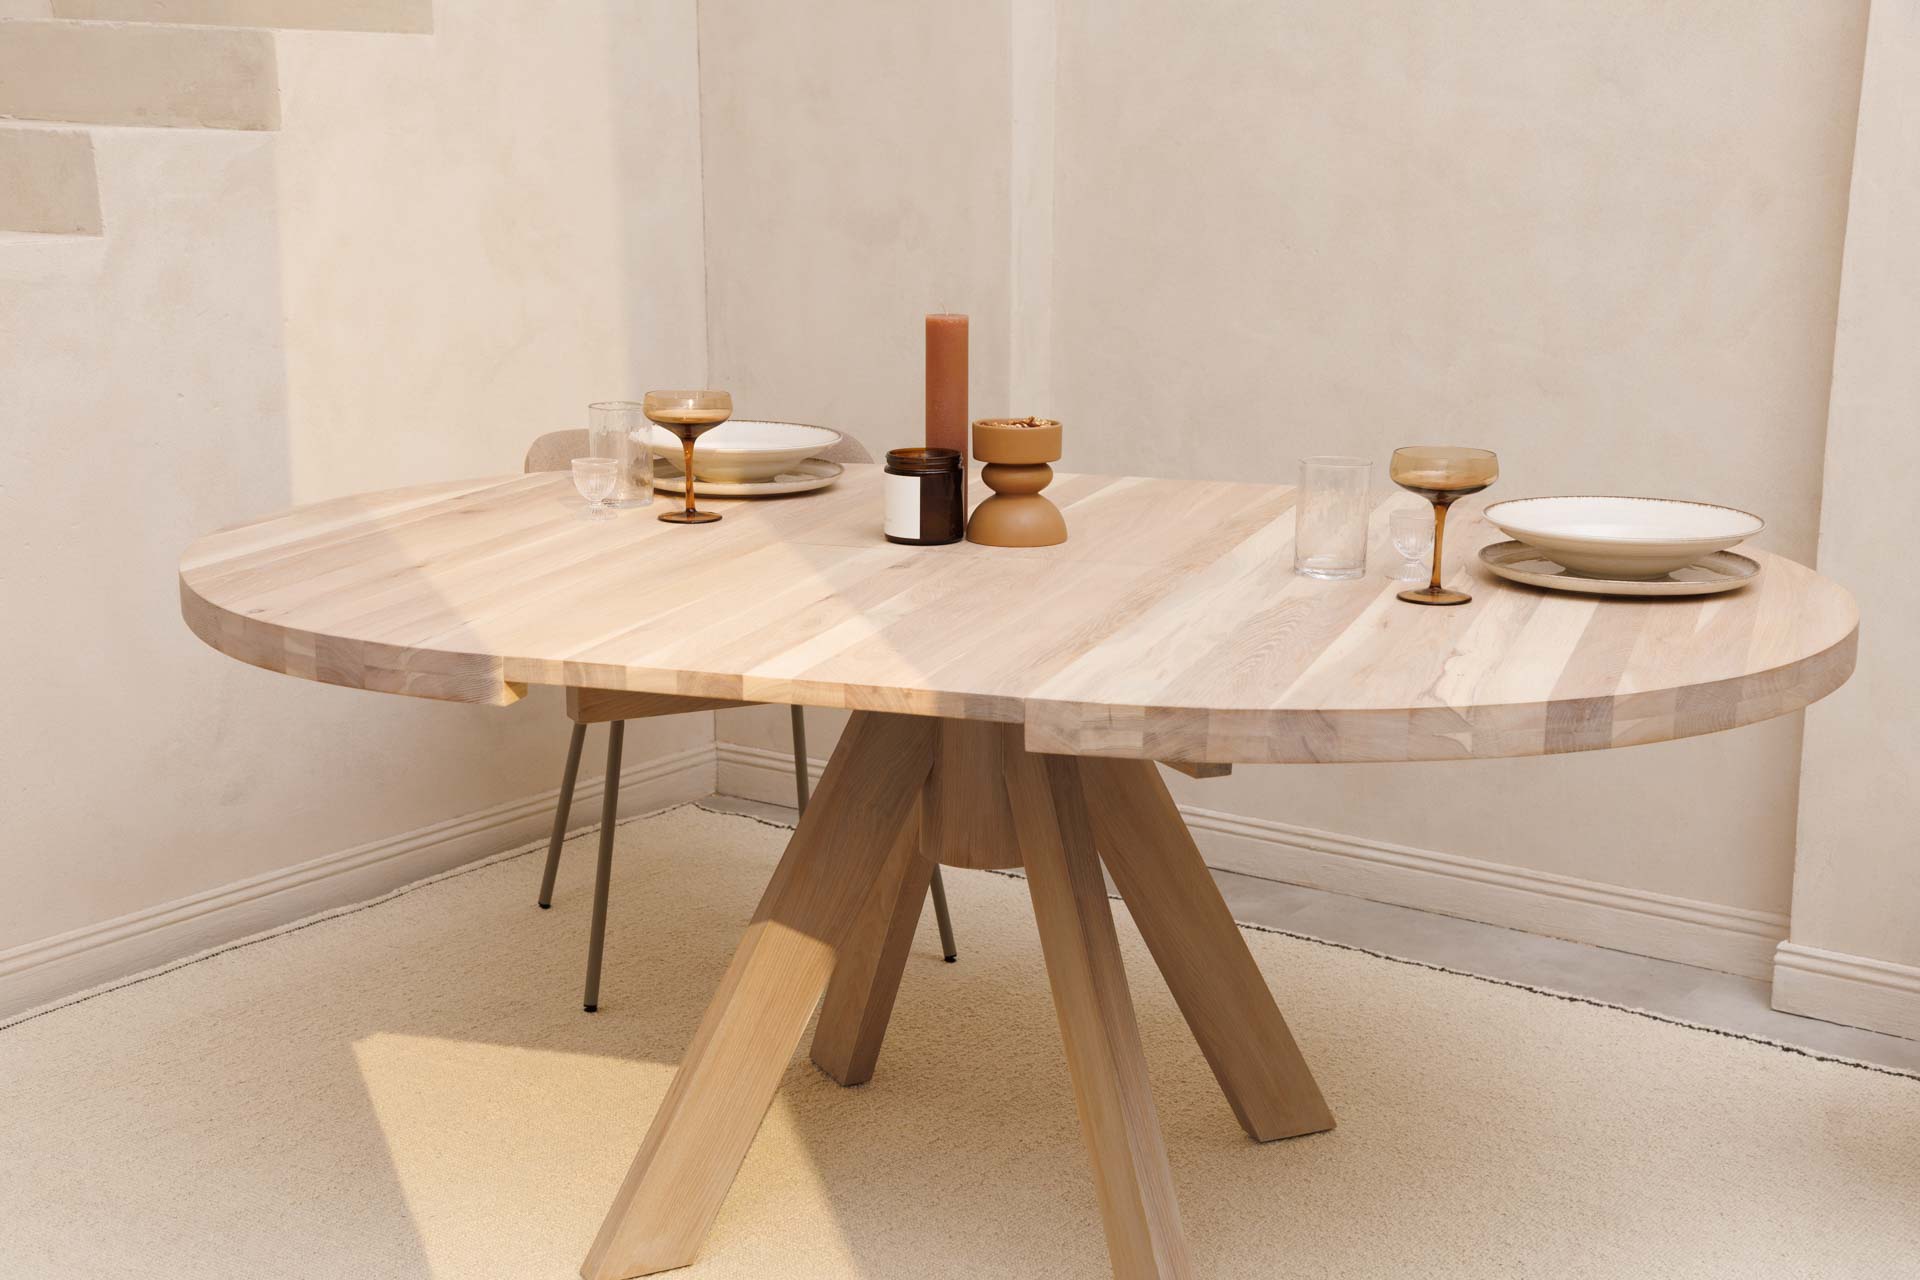 GRIND round dining table made from oak wood